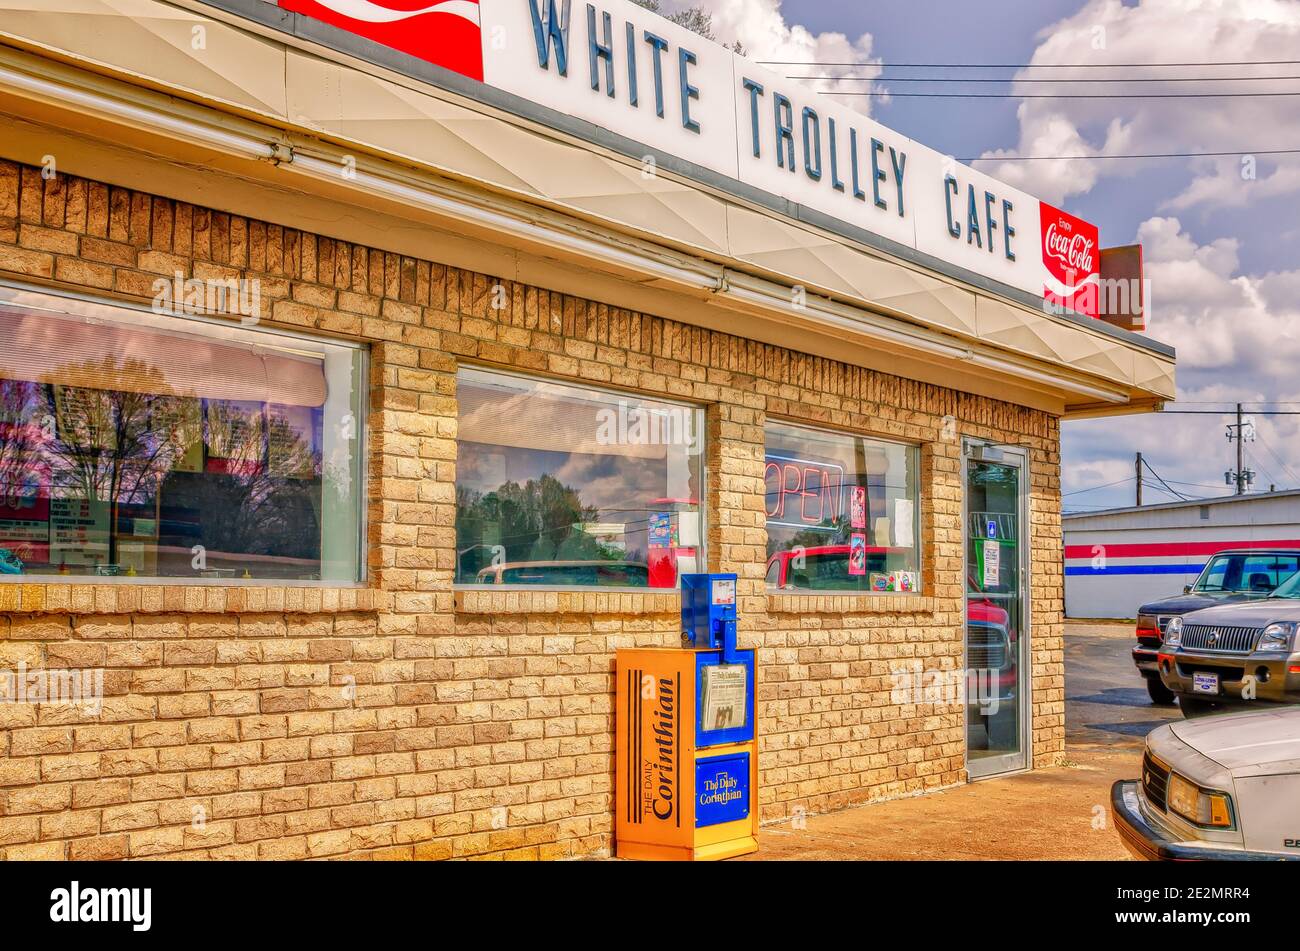 White Trolley Cafe is pictured, March 14, 2012, in Corinth, Mississippi. The diner is known for its slugburger. Stock Photo